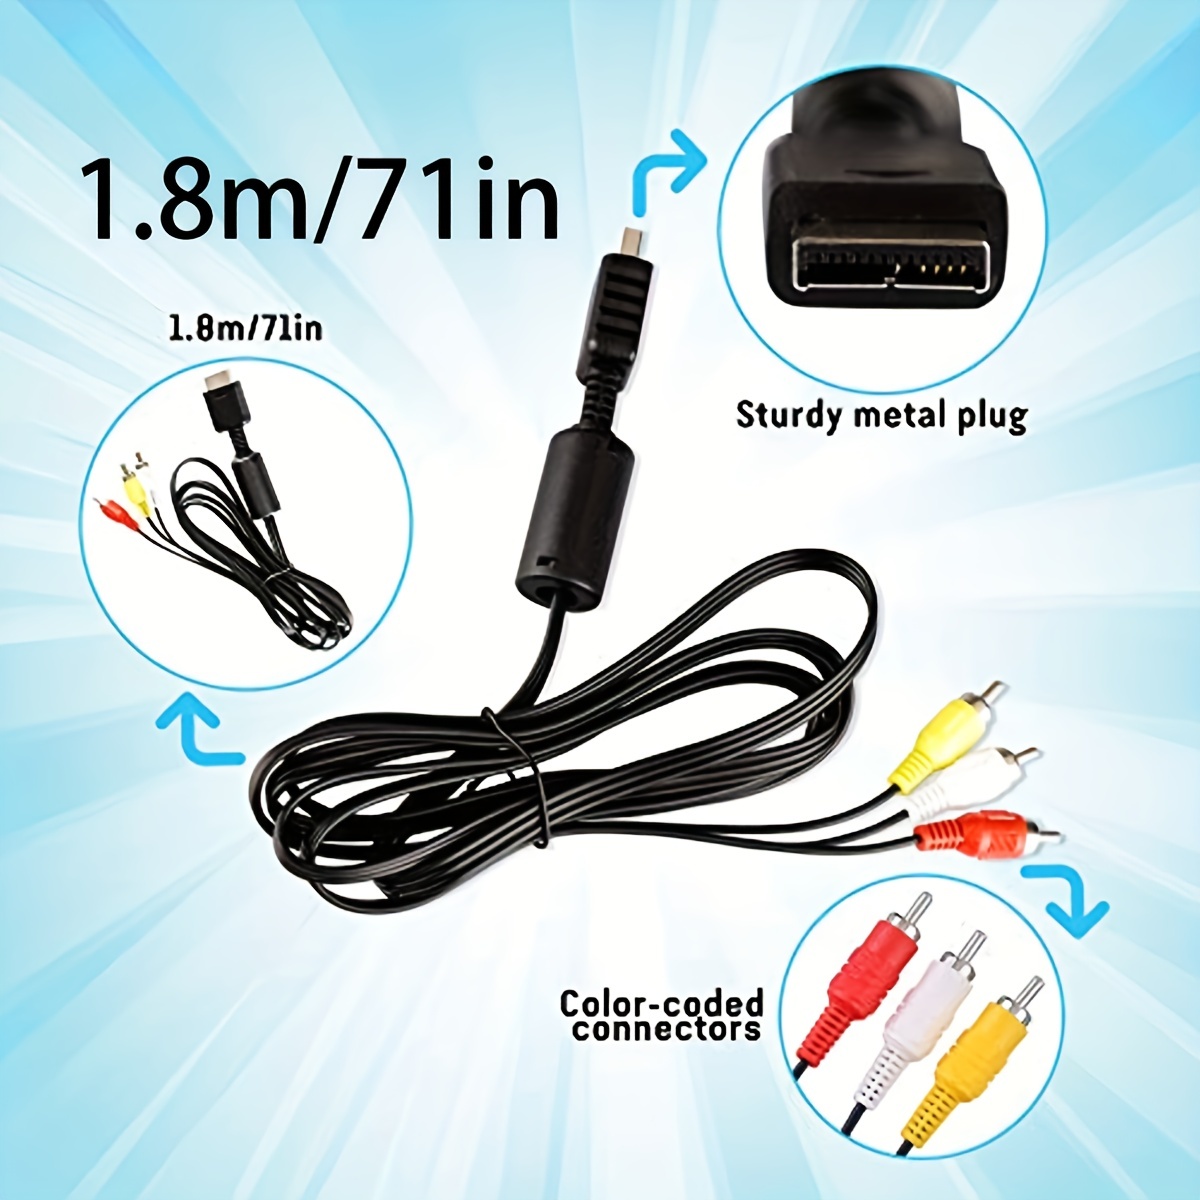 CABLE RCA MINI PLUG STEREO ROCK CABLE RCL20904D4 3MT - Accesorios